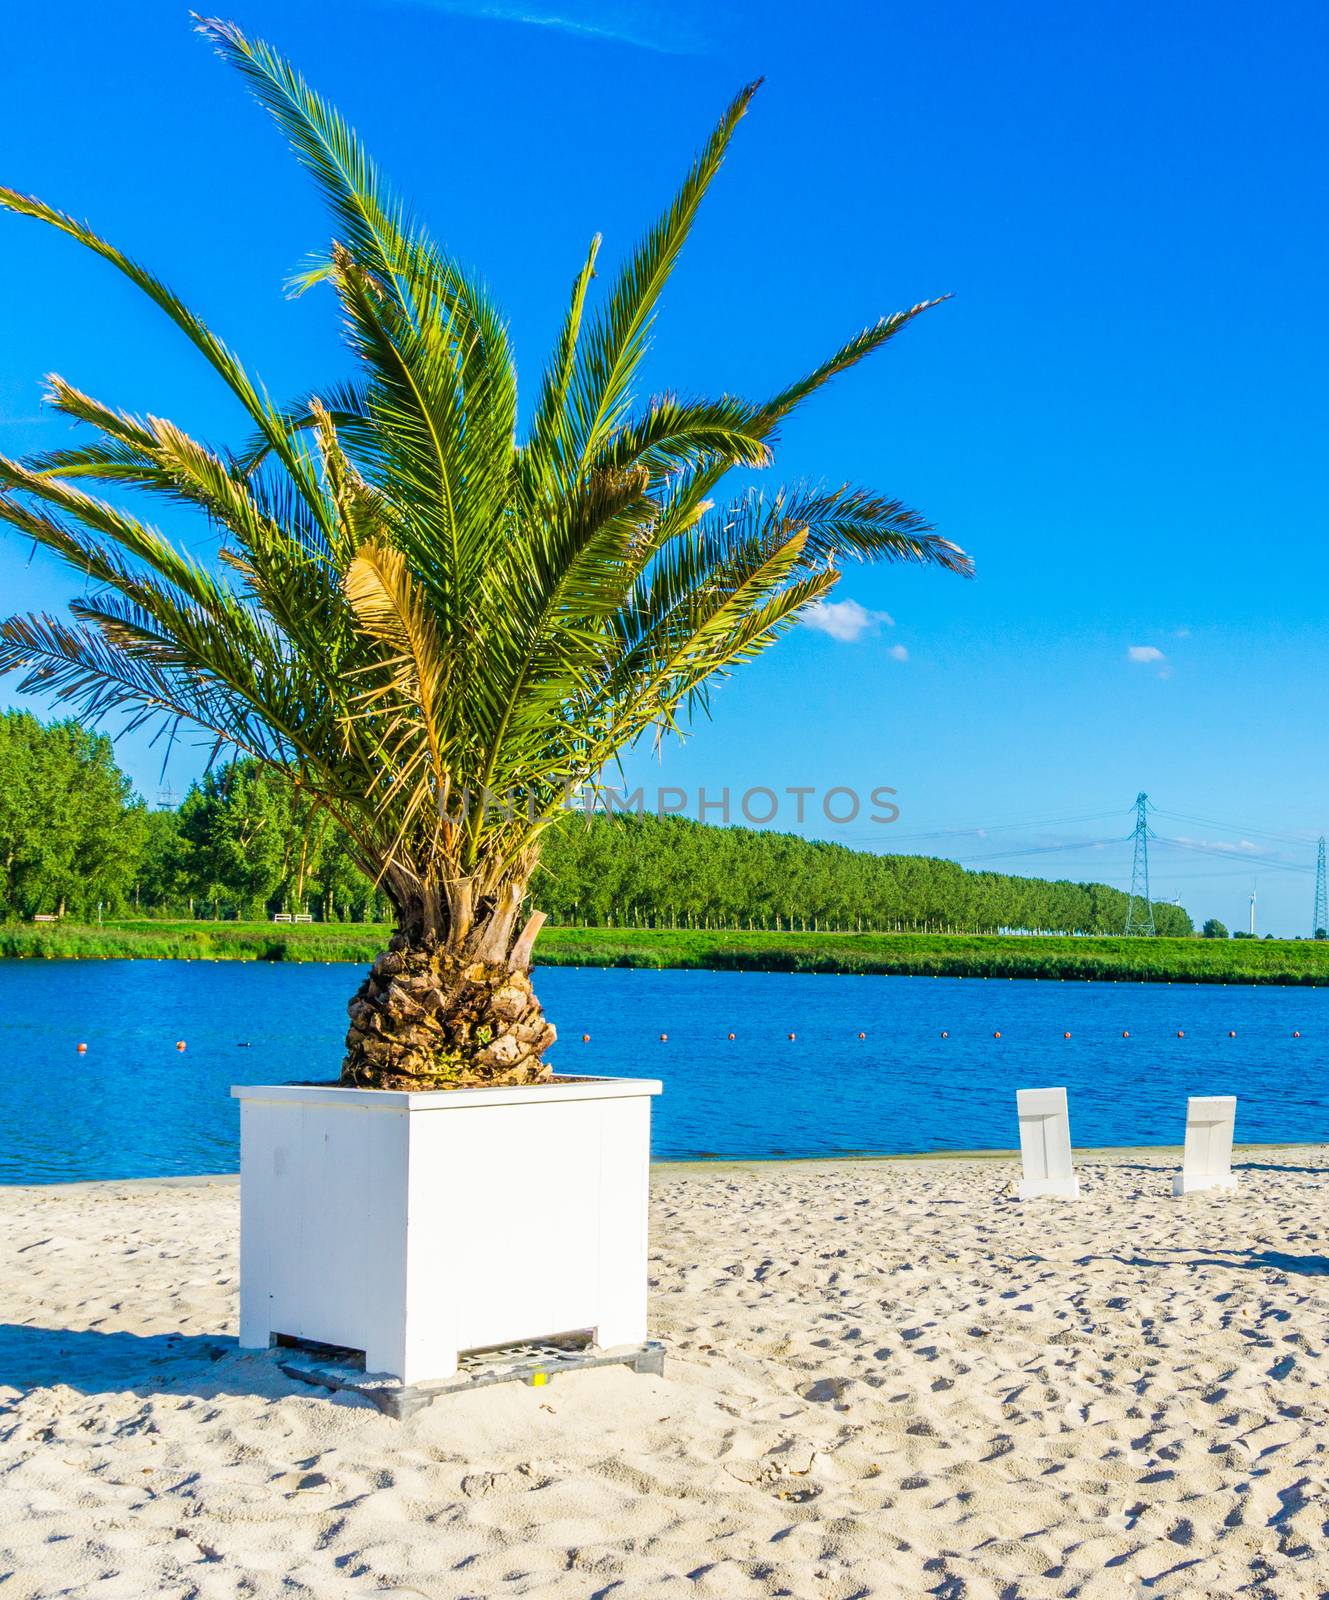 palm tree in a planter at a beach resort at a lake landscape by charlottebleijenberg